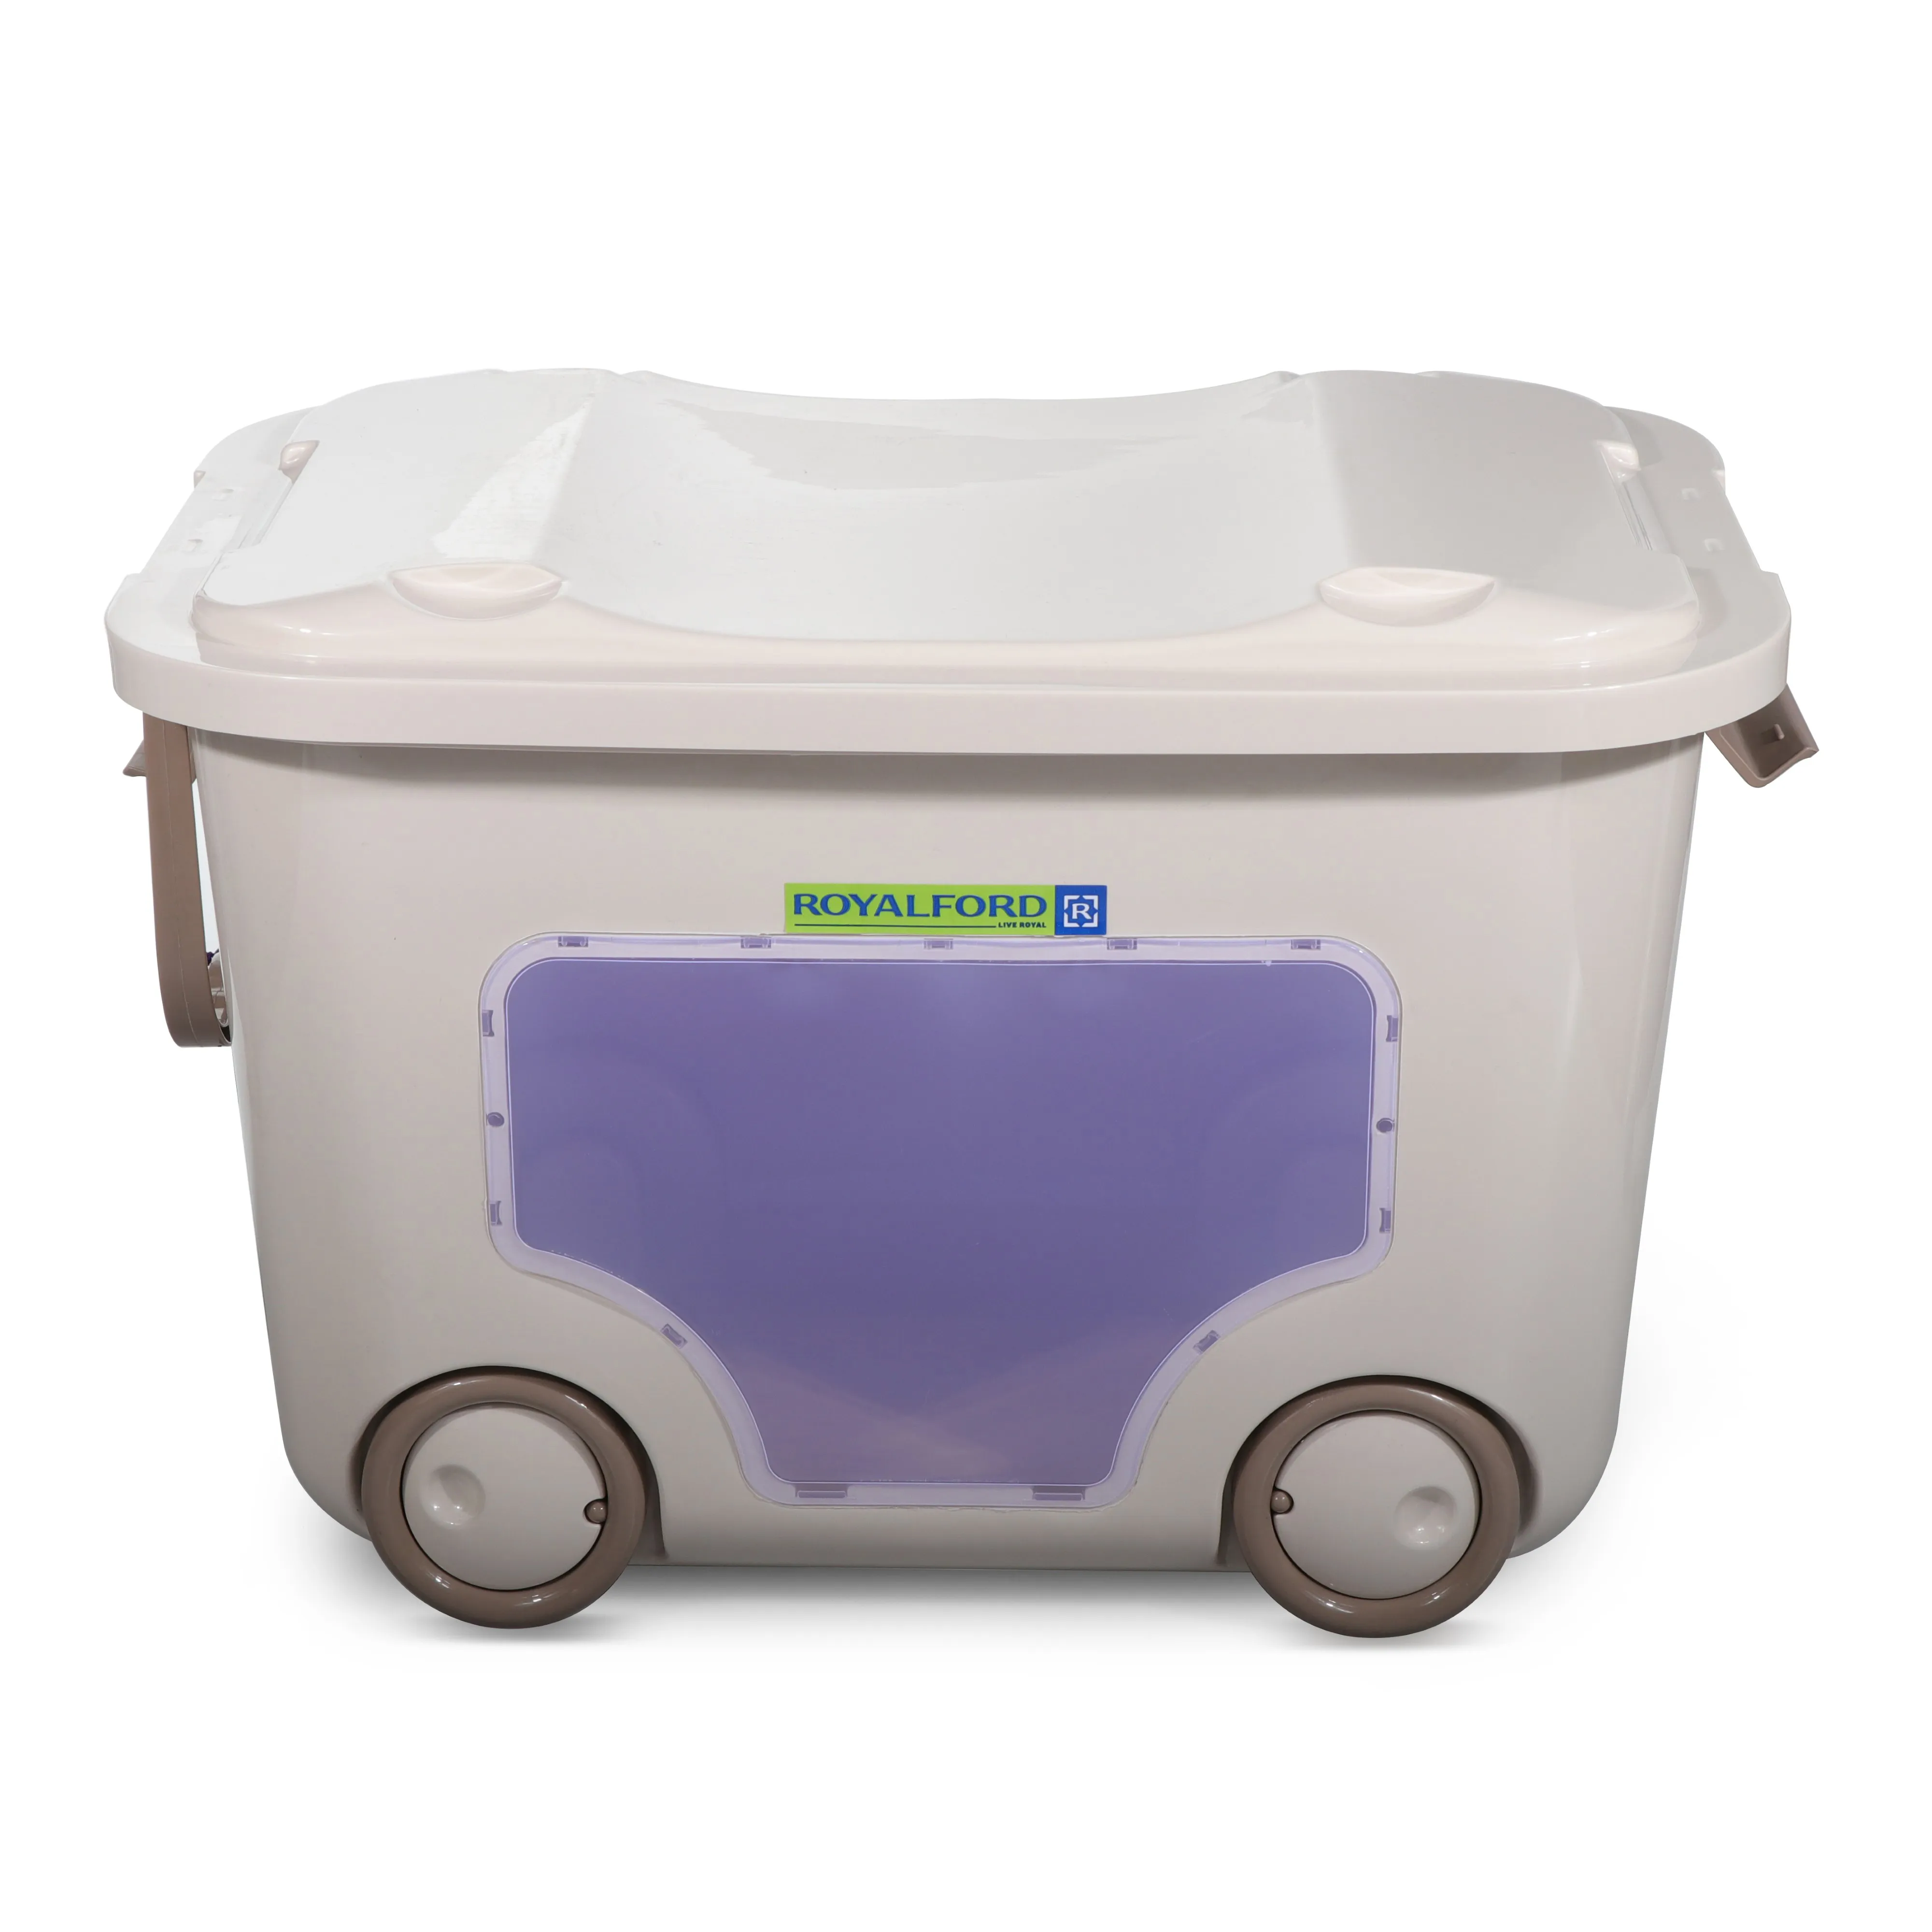 Royalford Medium See Through Storage Trolly, Multifunctional, RF9304 Laundry Hamper with Lid & Wheels Clear Window and Carry Handles Great for Clothes, Blankets, Closets, Bedrooms & More